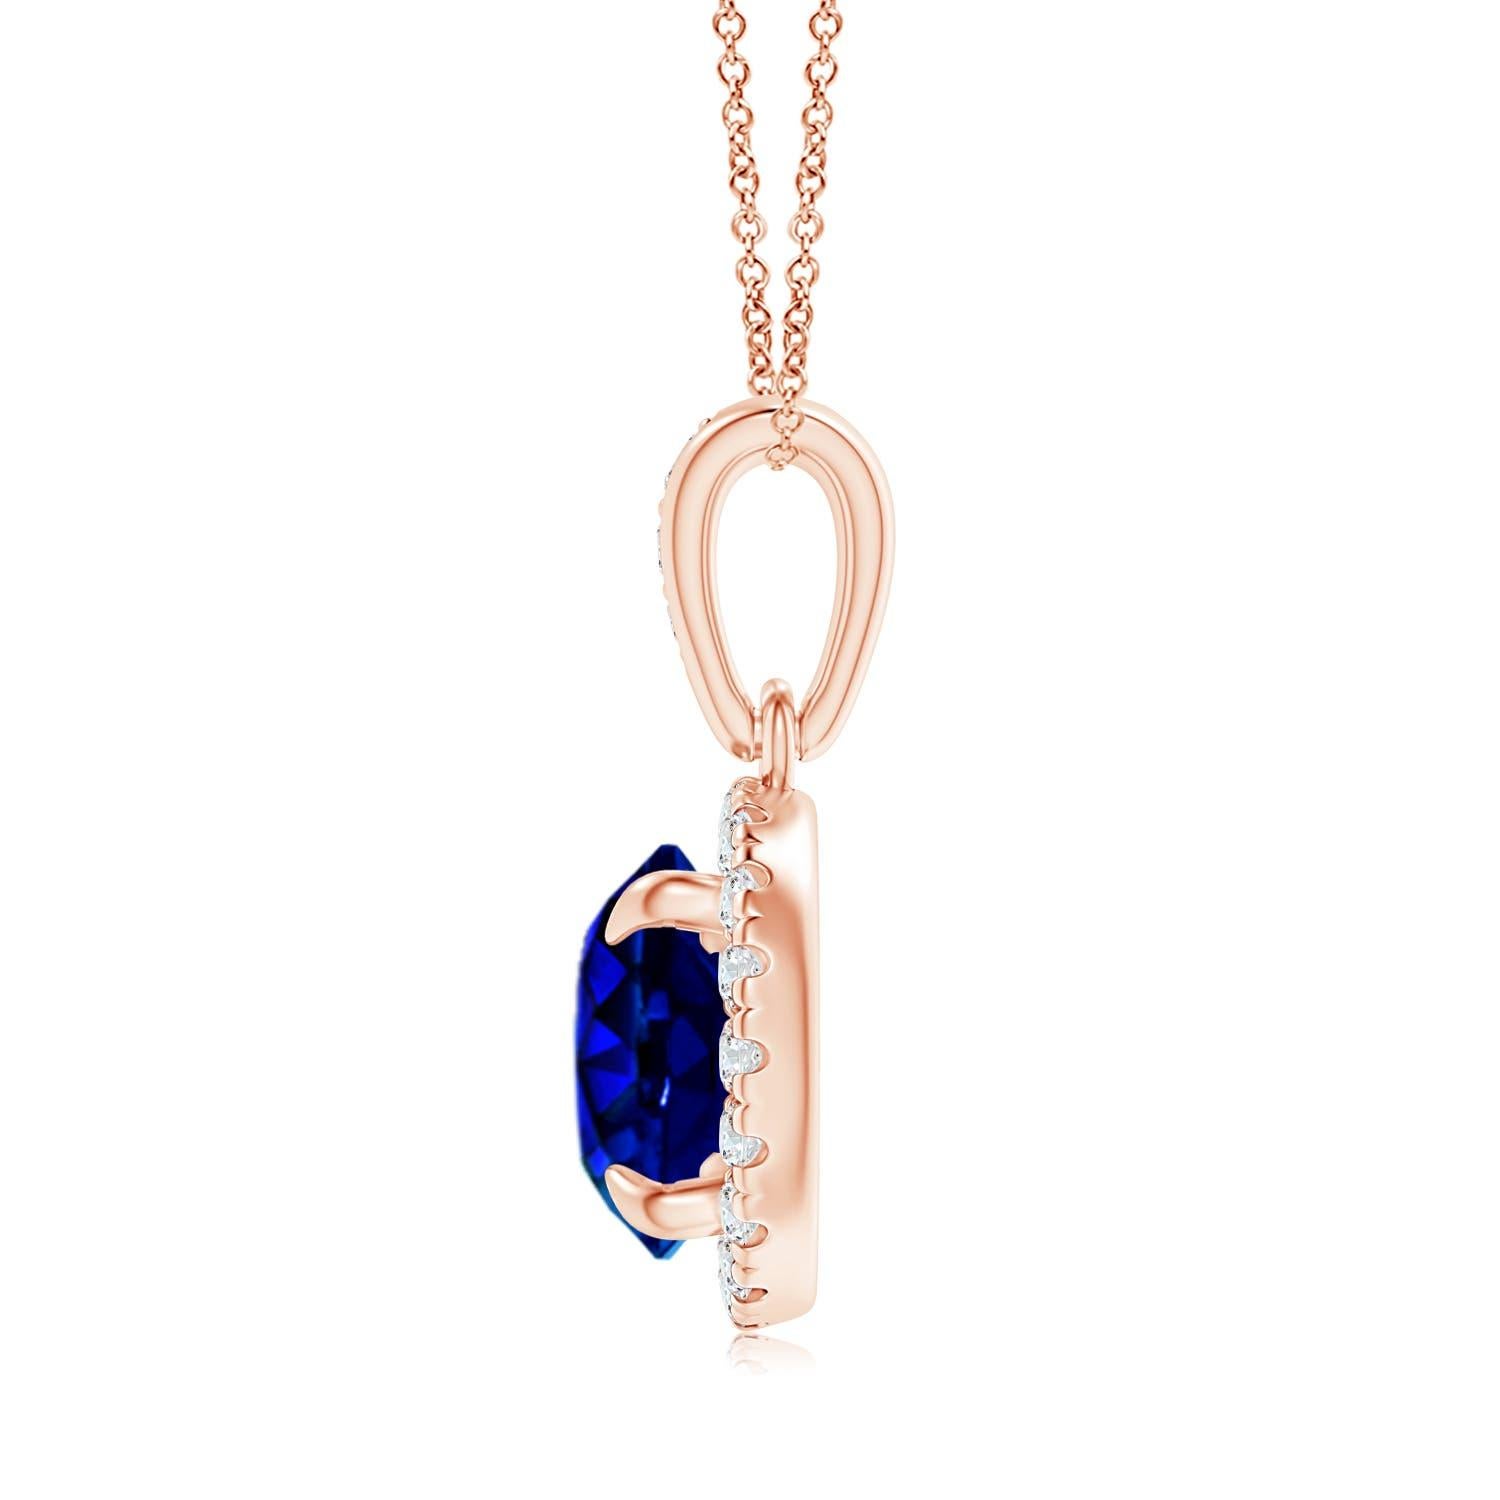 This stunning pendant showcases a GIA certified sapphire, secured in a claw setting. Glittering round diamonds encircle this round blue gemstone in a brilliant halo and illuminate its mesmerizing hue. Additional diamonds adorn the bale and